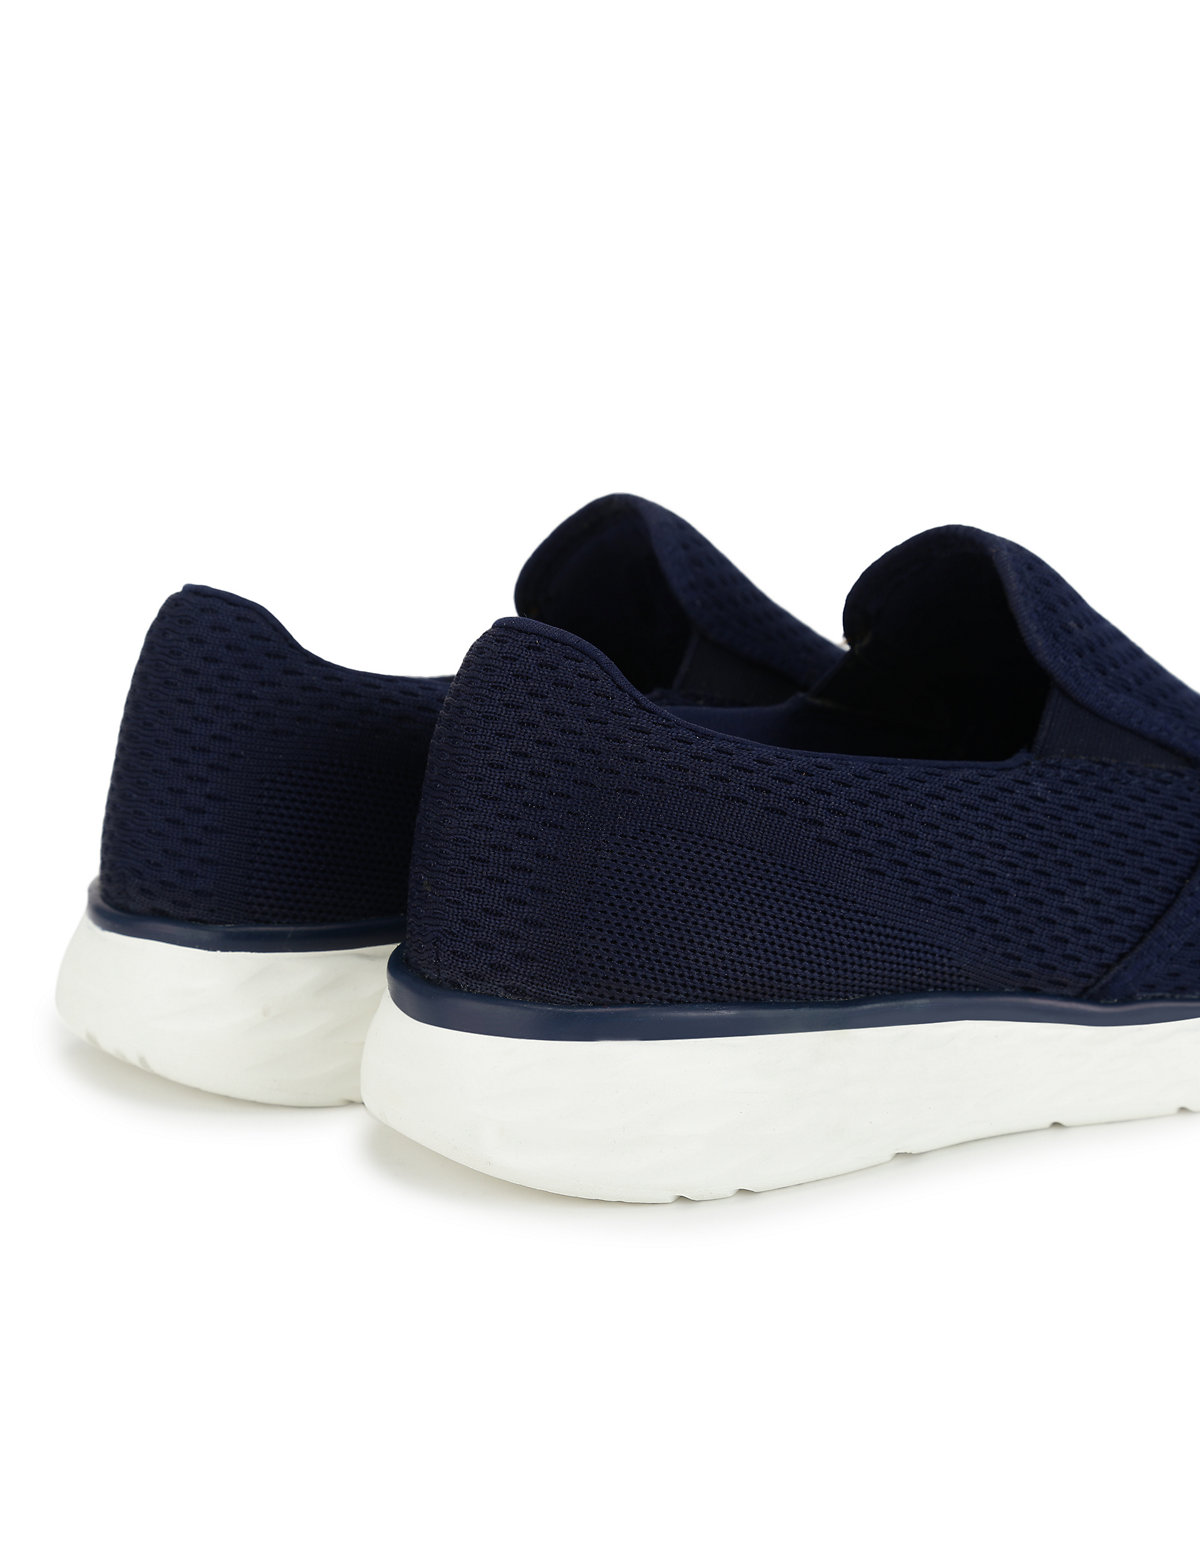 Mesh Textured Standard Fit Casual Shoes